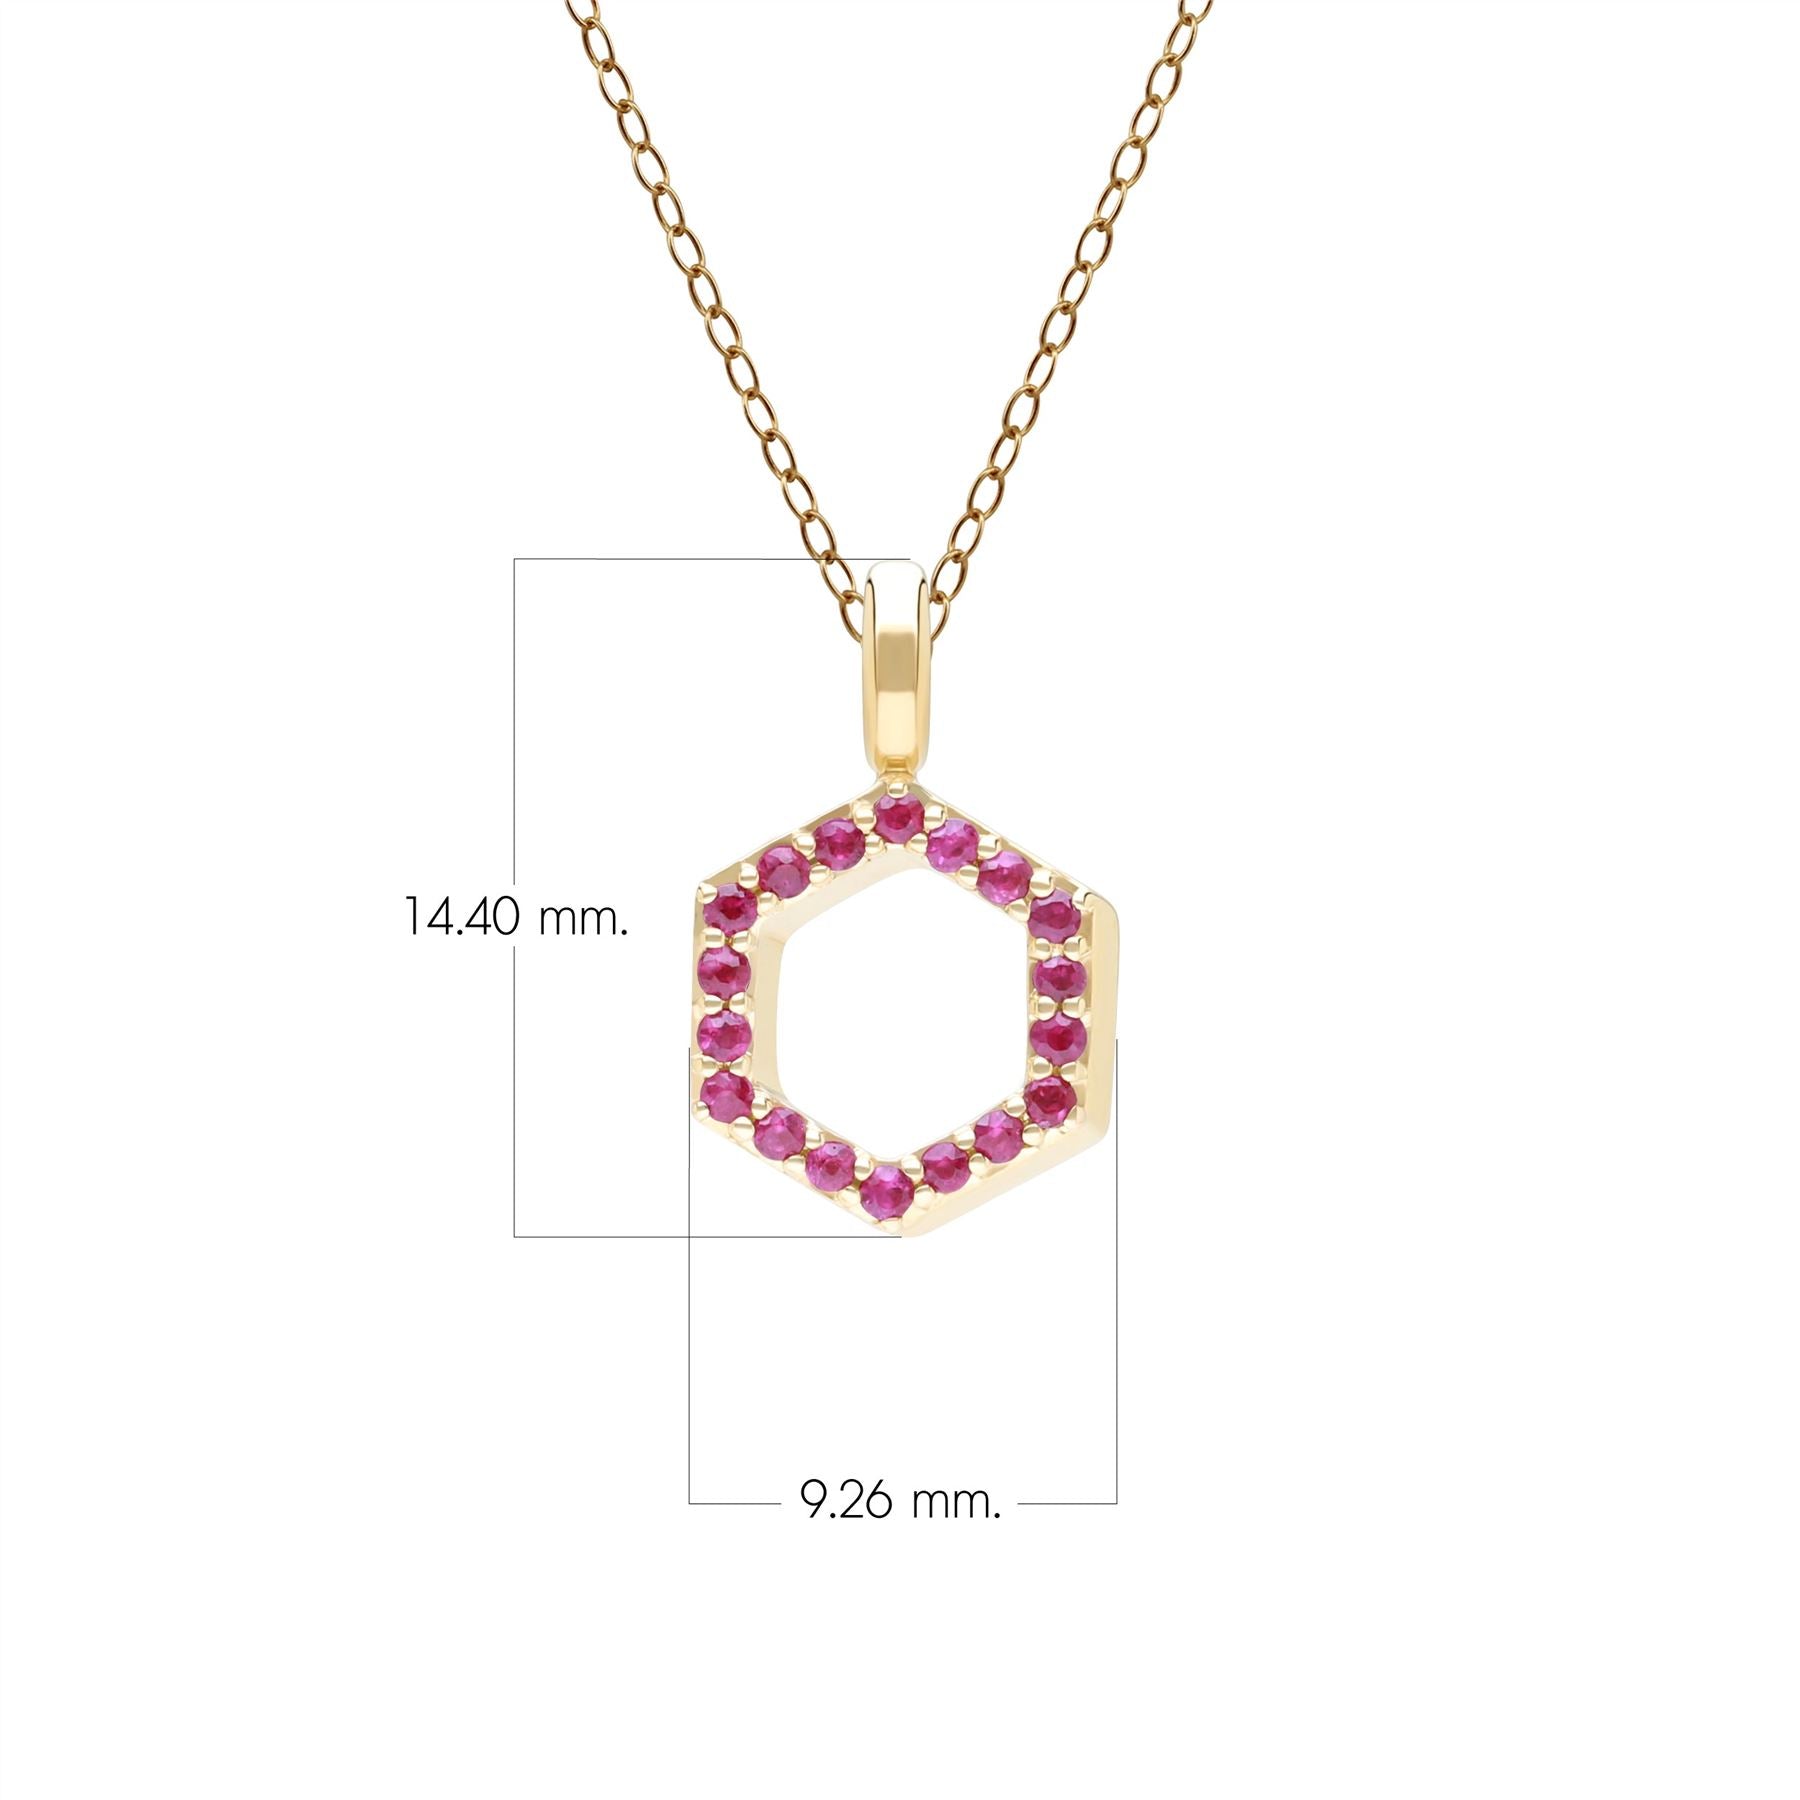 Geometric Hex ruby Pendant Necklace in 9ct Yellow Gold Dimensions 